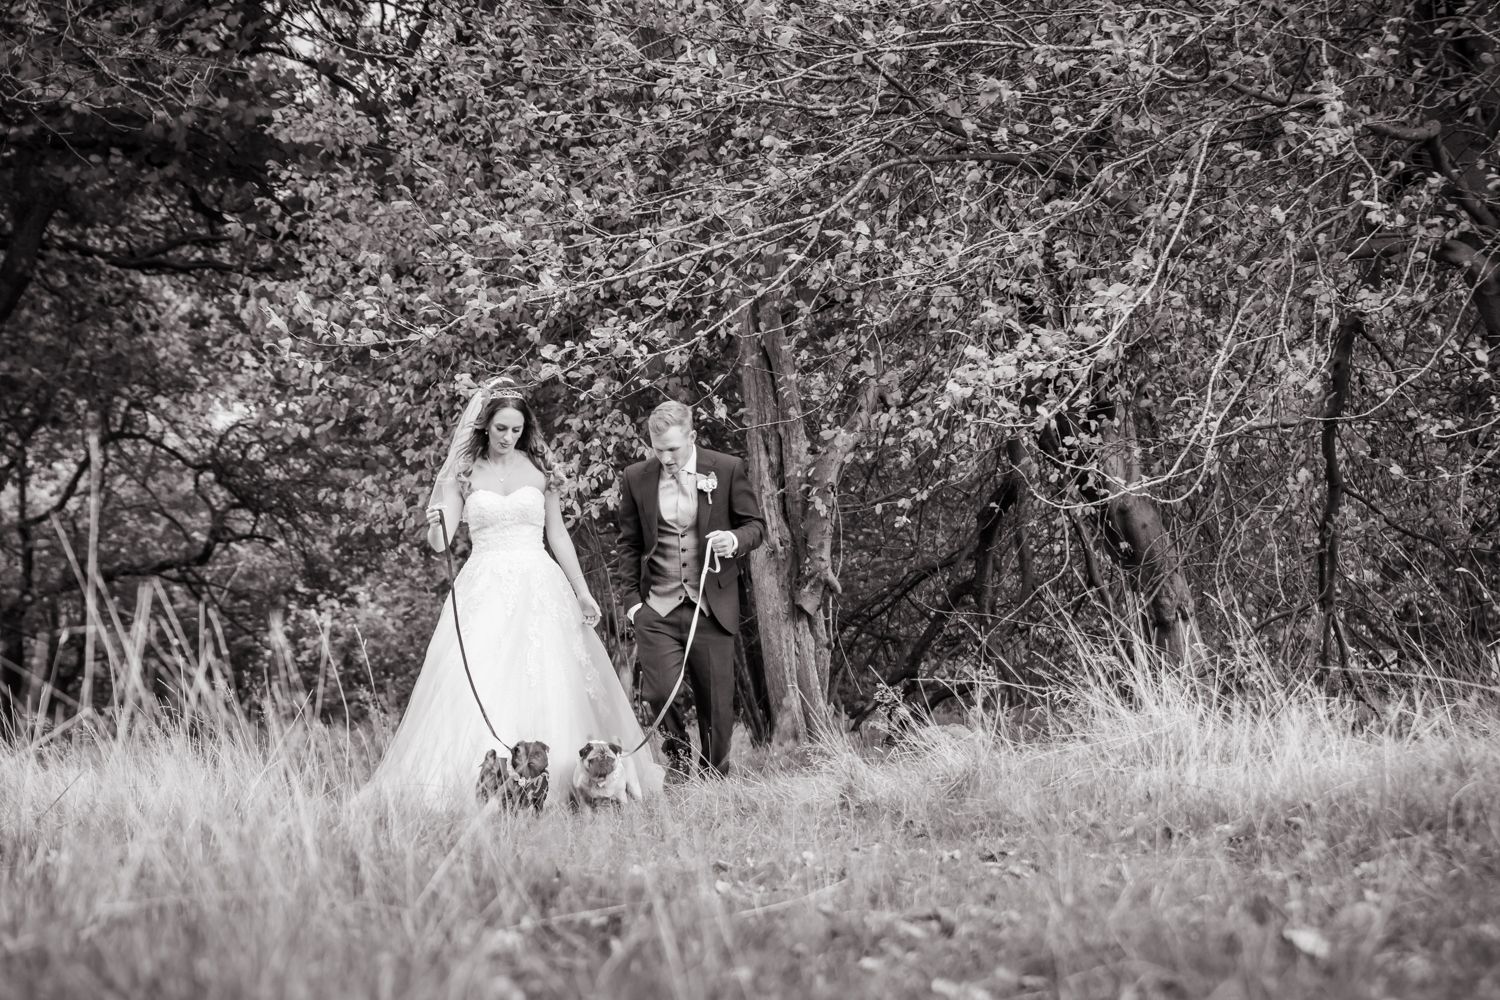 The bride and groom walk towards the camera while looking down at their two pugs who are on leads.